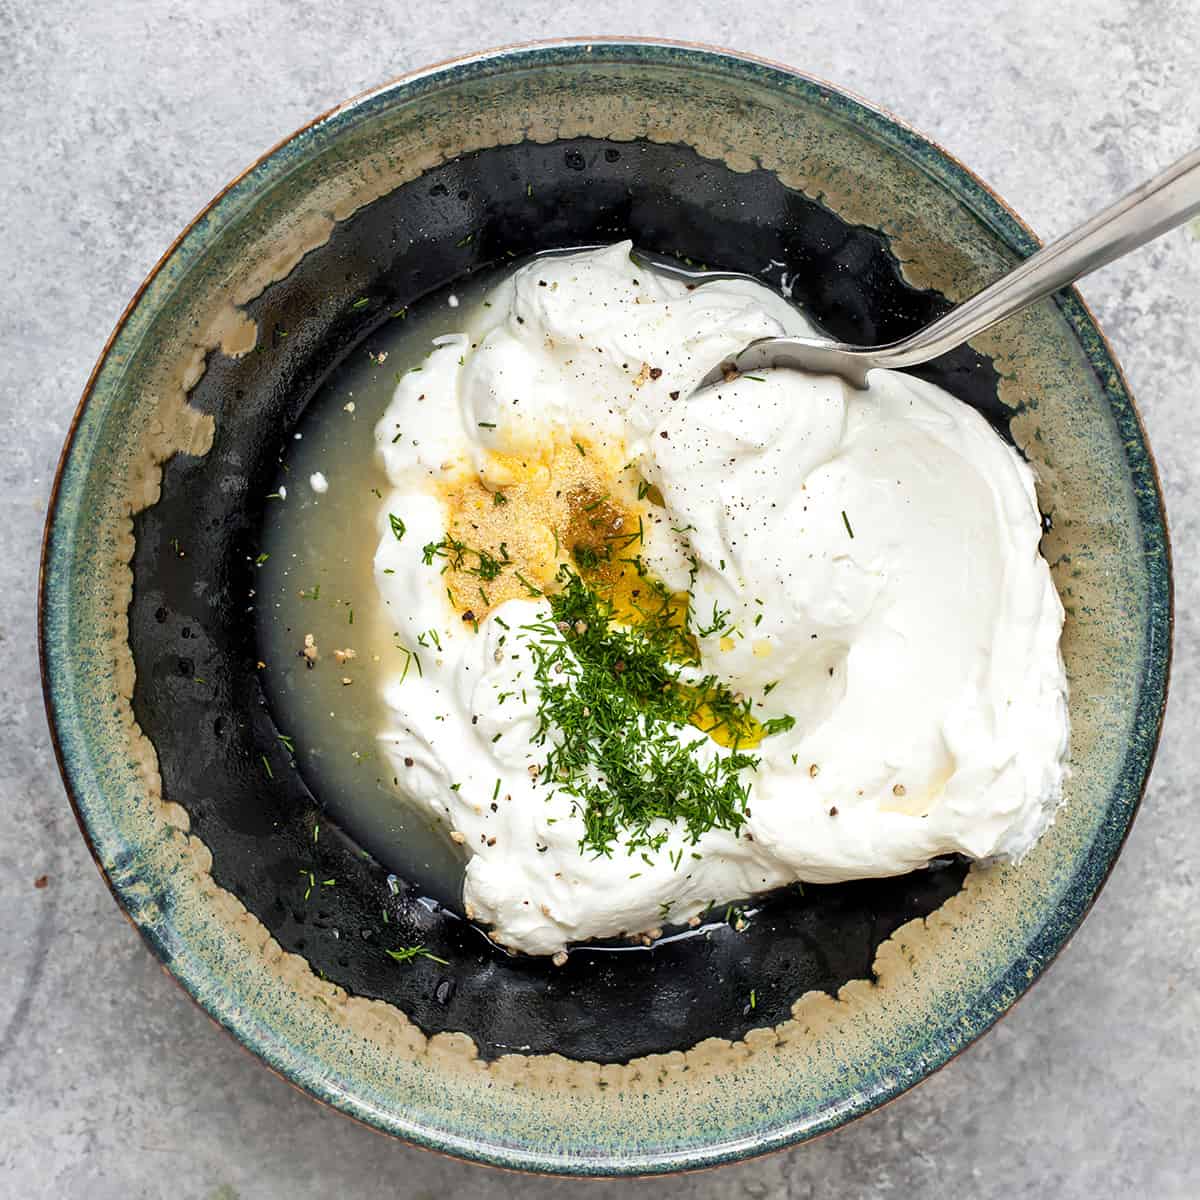 How to Make Tzatziki Sauce - combining ingredients in a bowl before stirring